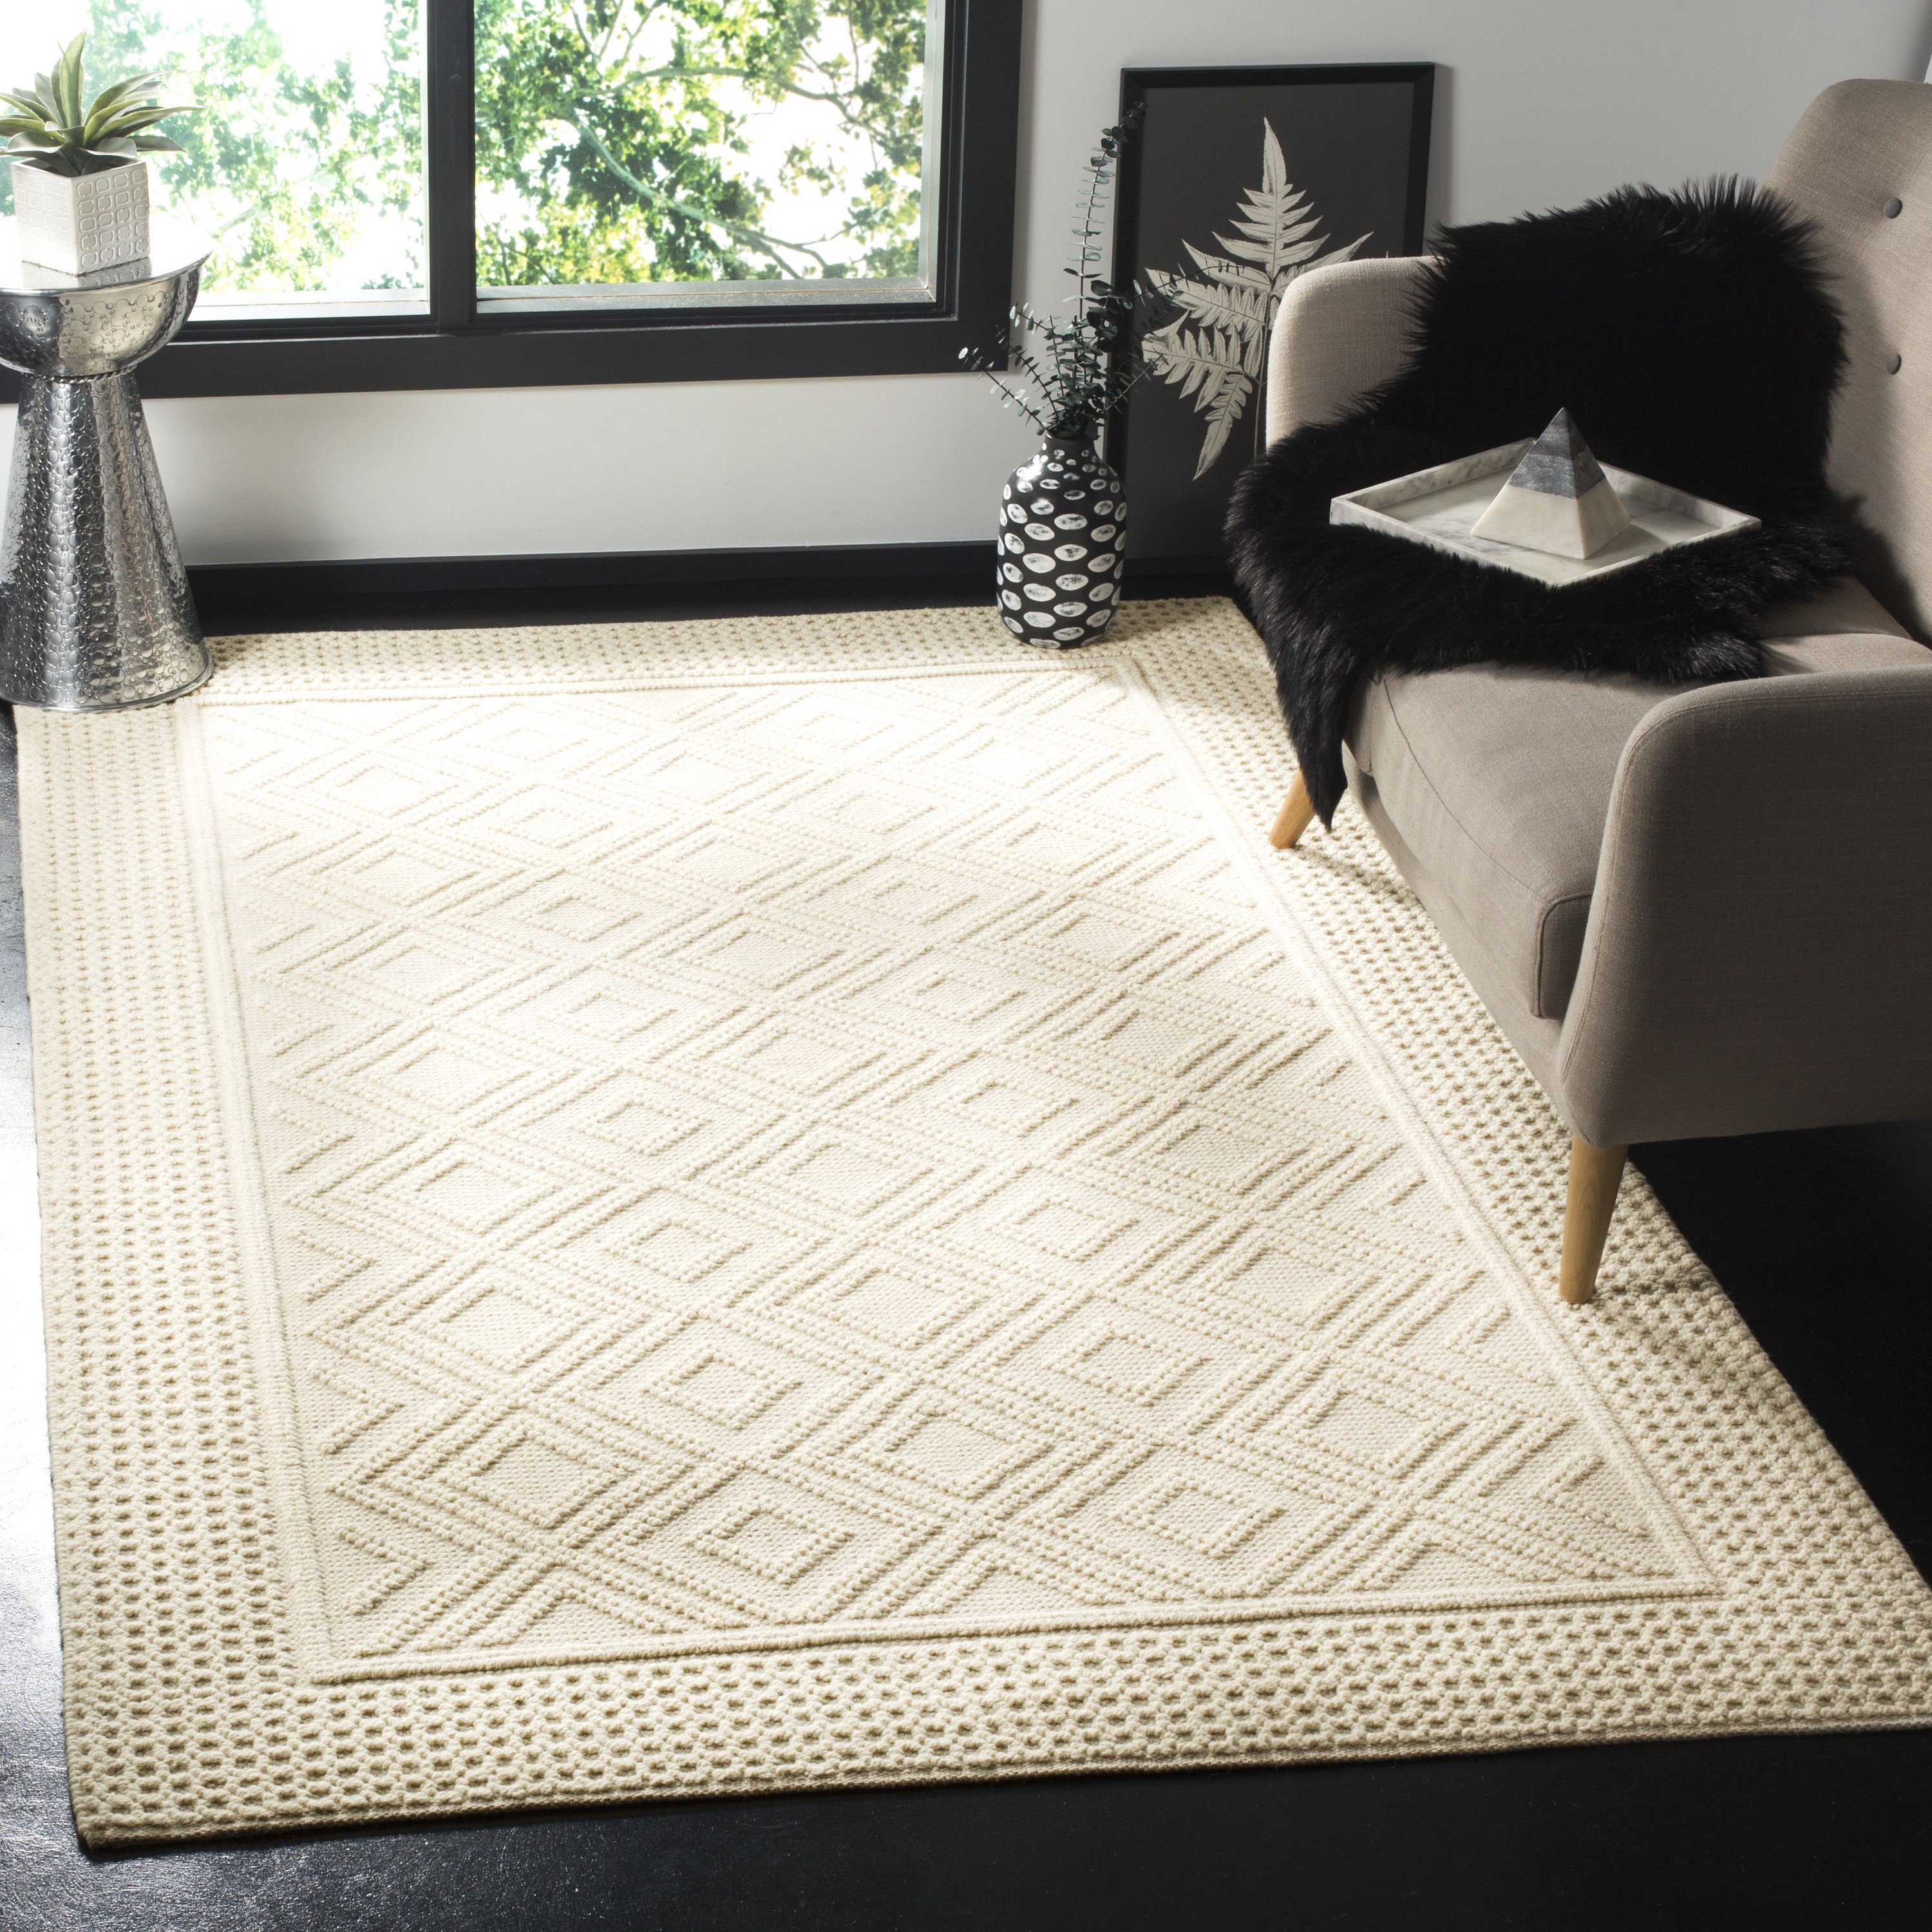 IOHOUZE Washable Area Rug 4x6, Non Slip Farmhouse Bedroom Rugs Entryway  Rugs, Low Pile Light Grey Cotton Woven Indoor Outdoor Modern Boho Carpet  for